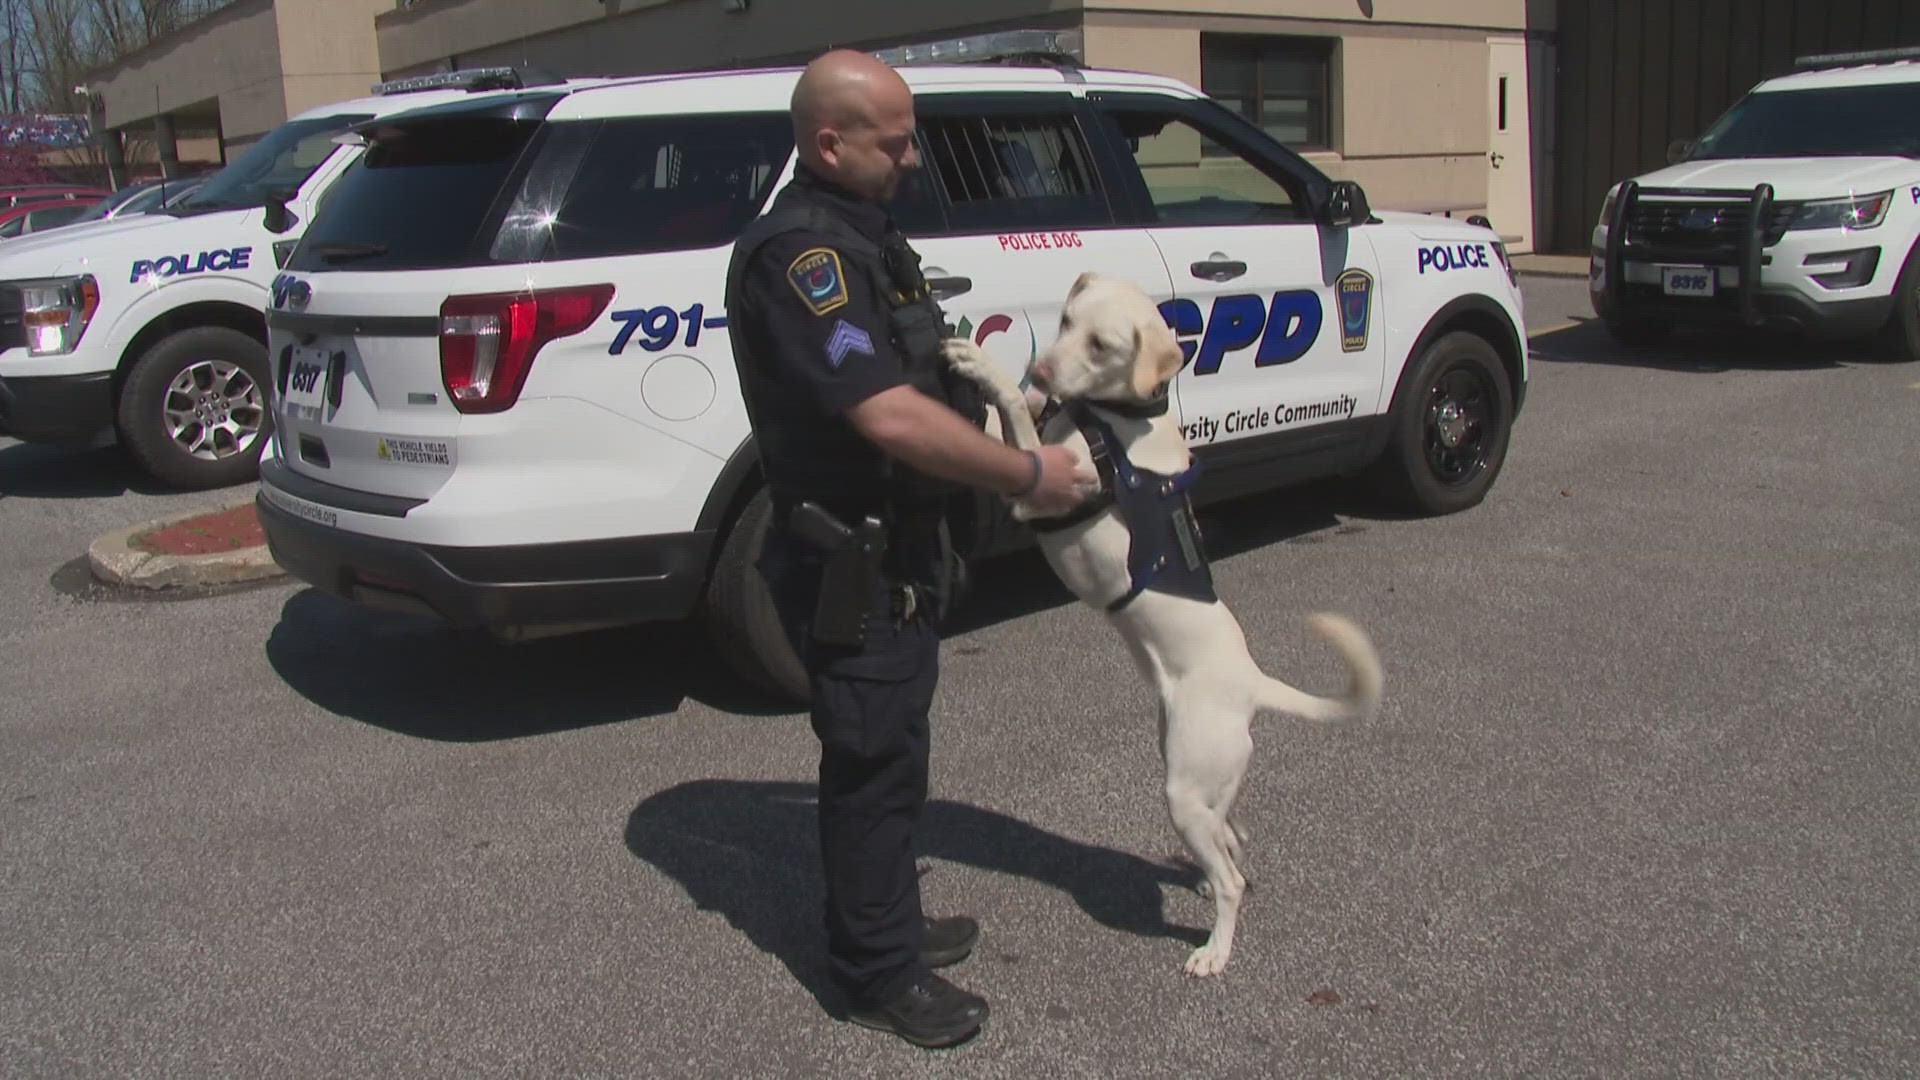 Gracie, the K-9 at University Circle is already making an impact on the police department.